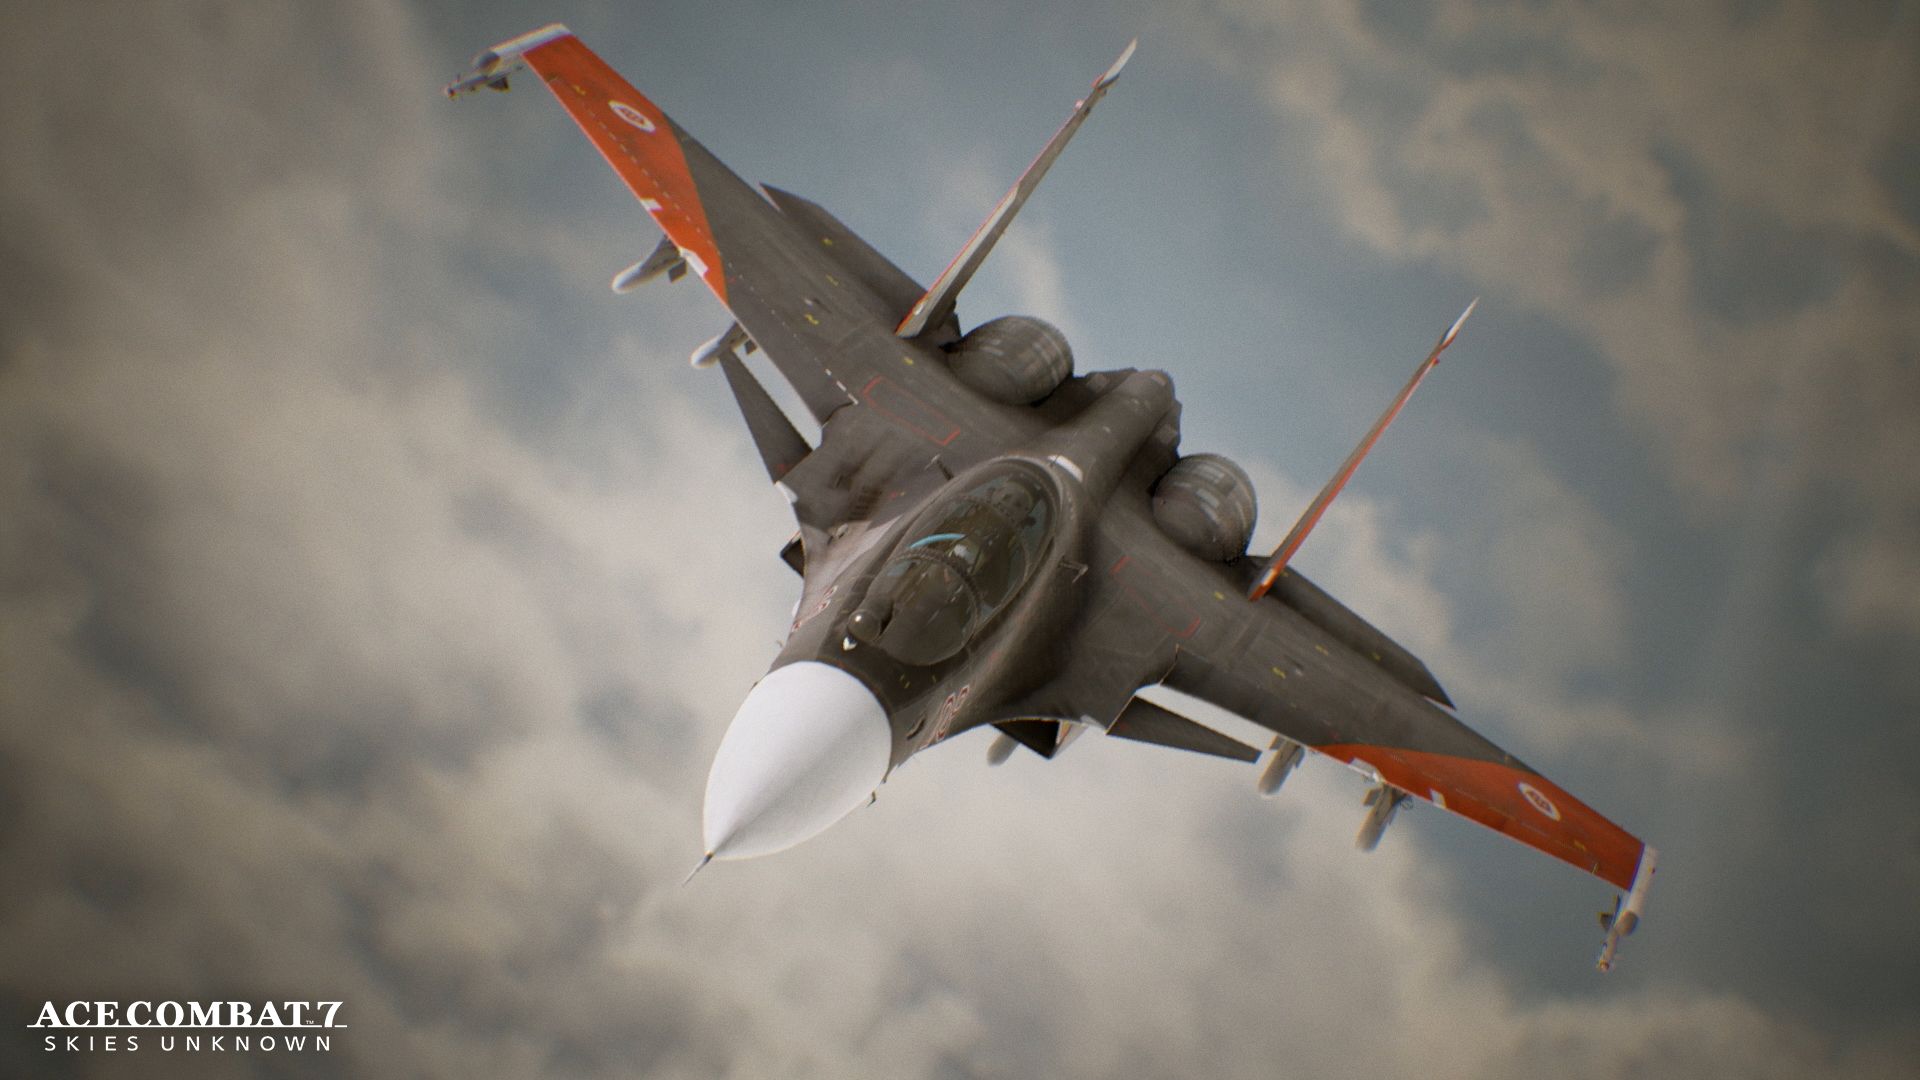 Ace Combat 7 Skies Unknown PC Performance Analysis